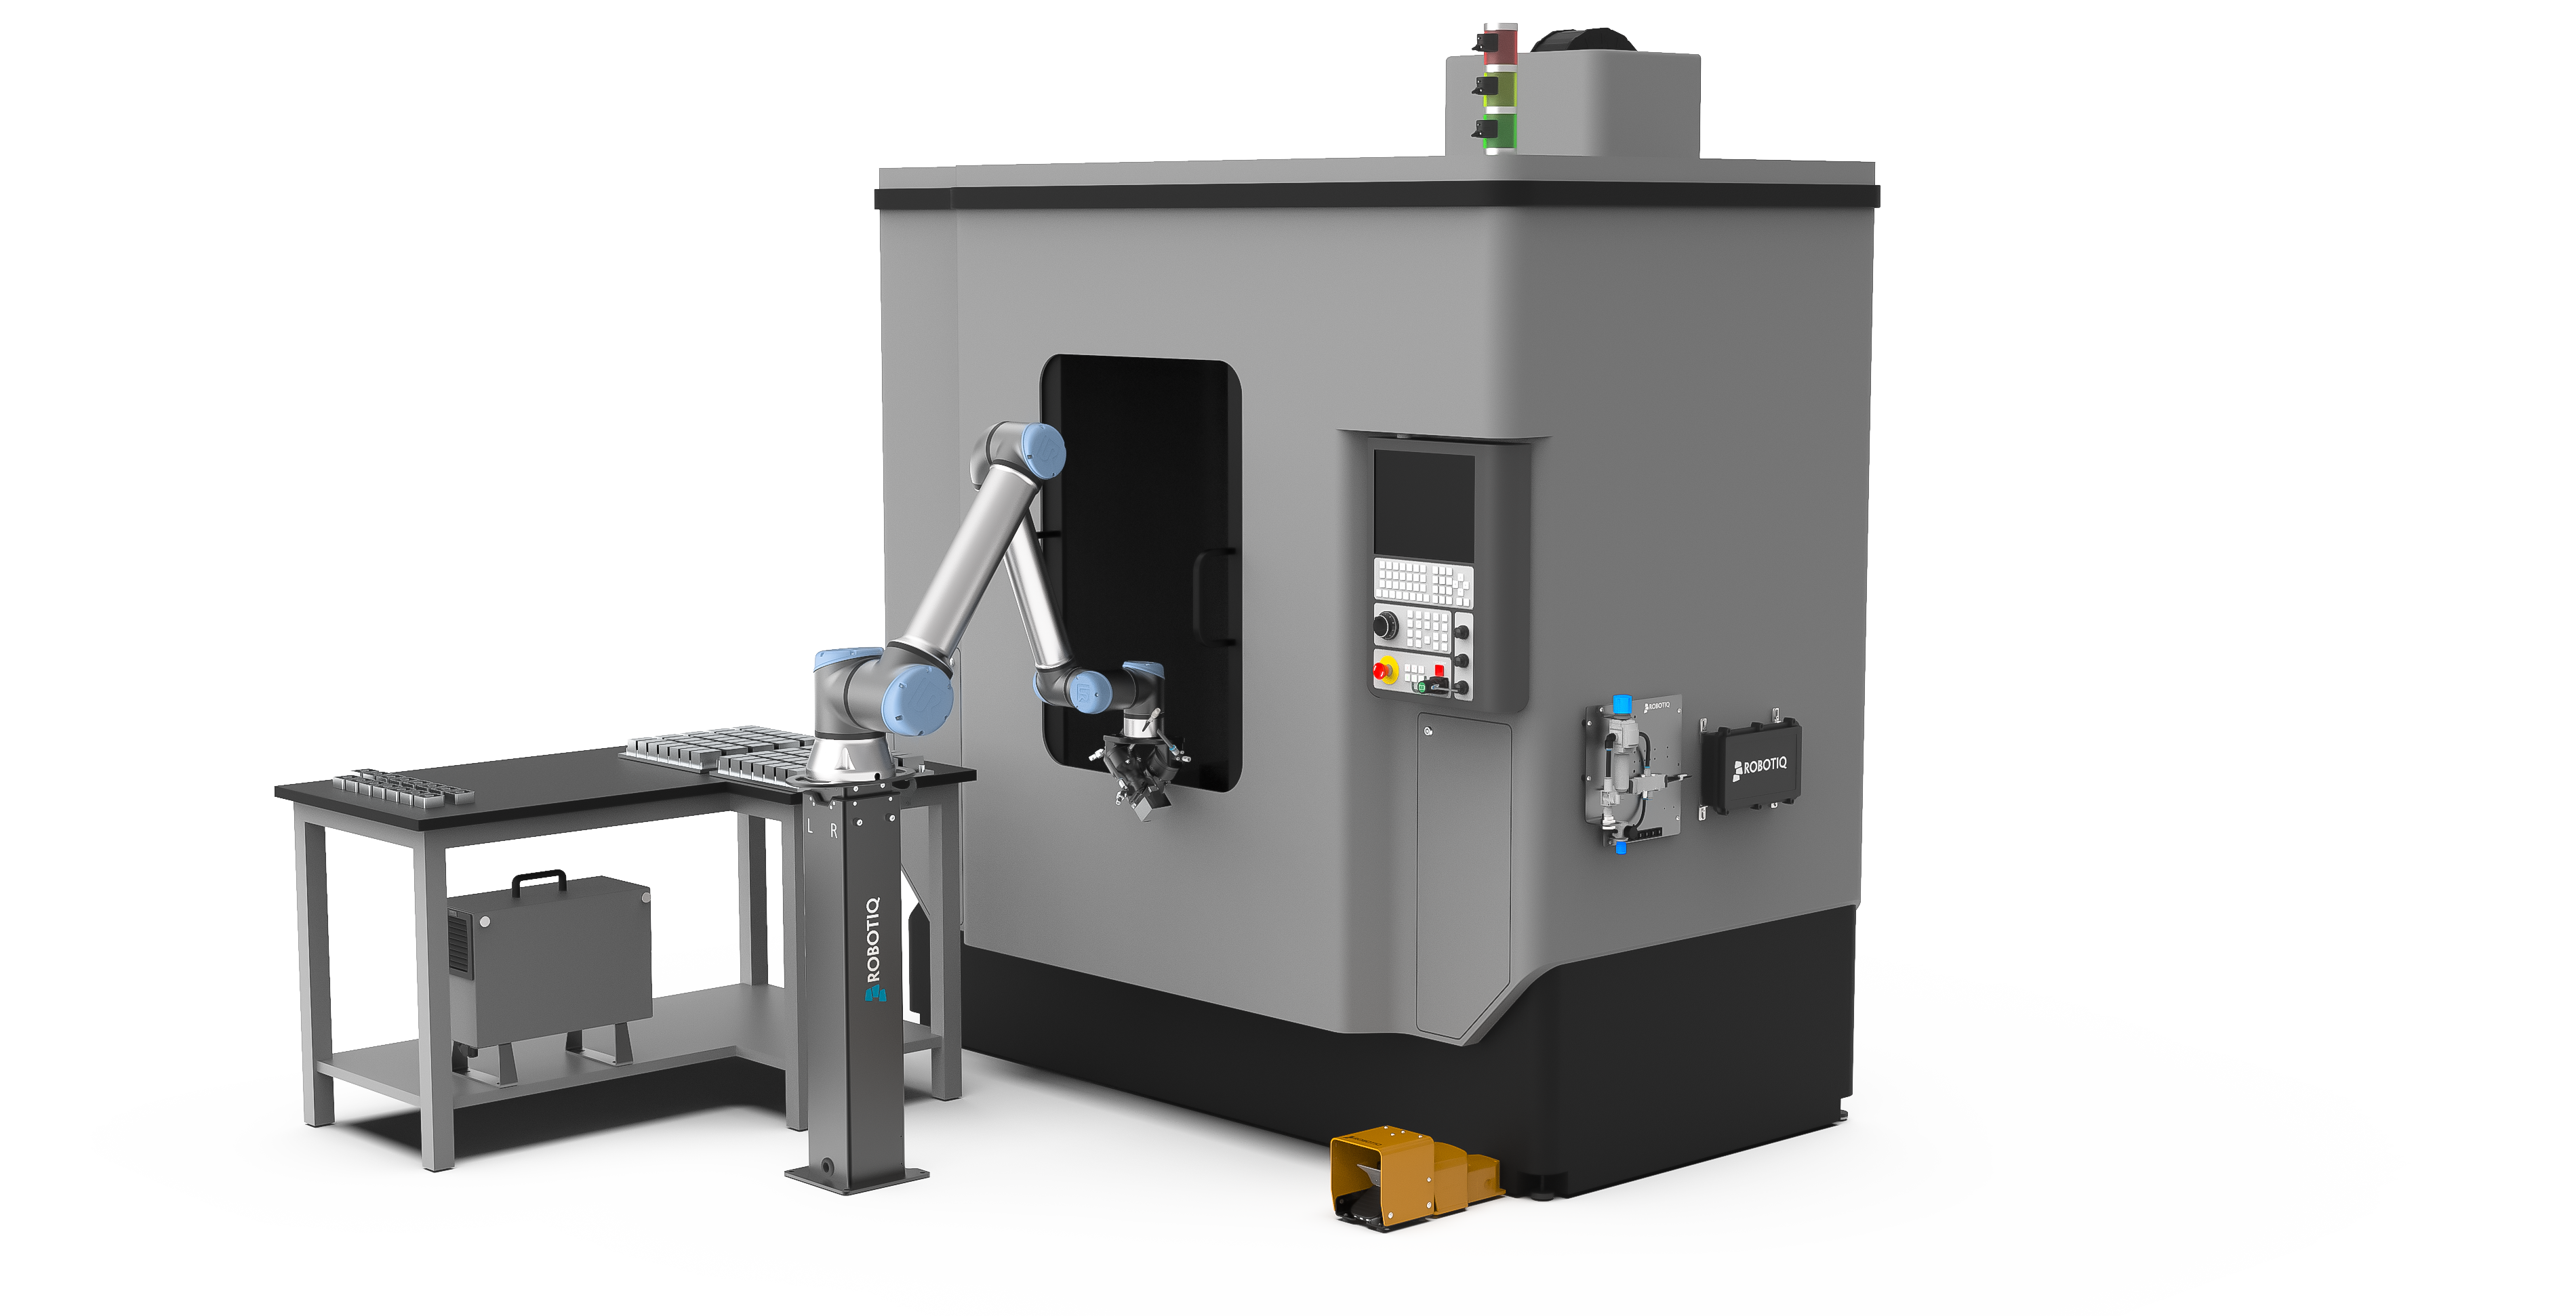 You are currently viewing Problem-Free and Reliable Second and Third Shifts That Will Increase Your CNC Productiveness